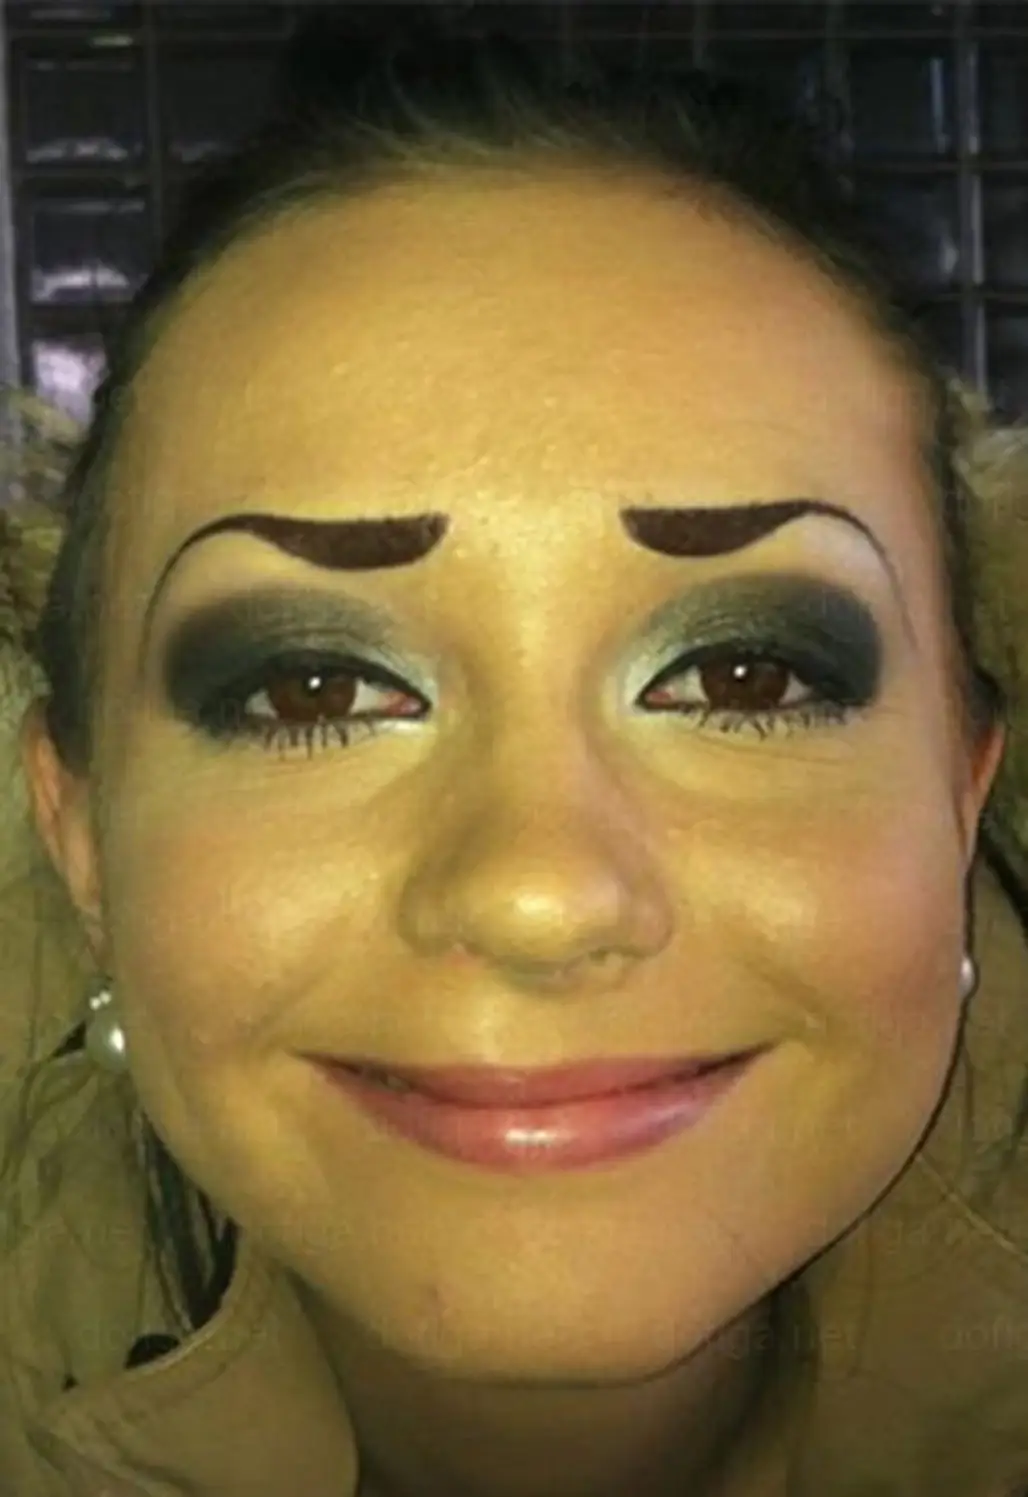 Keeping a Level Brow